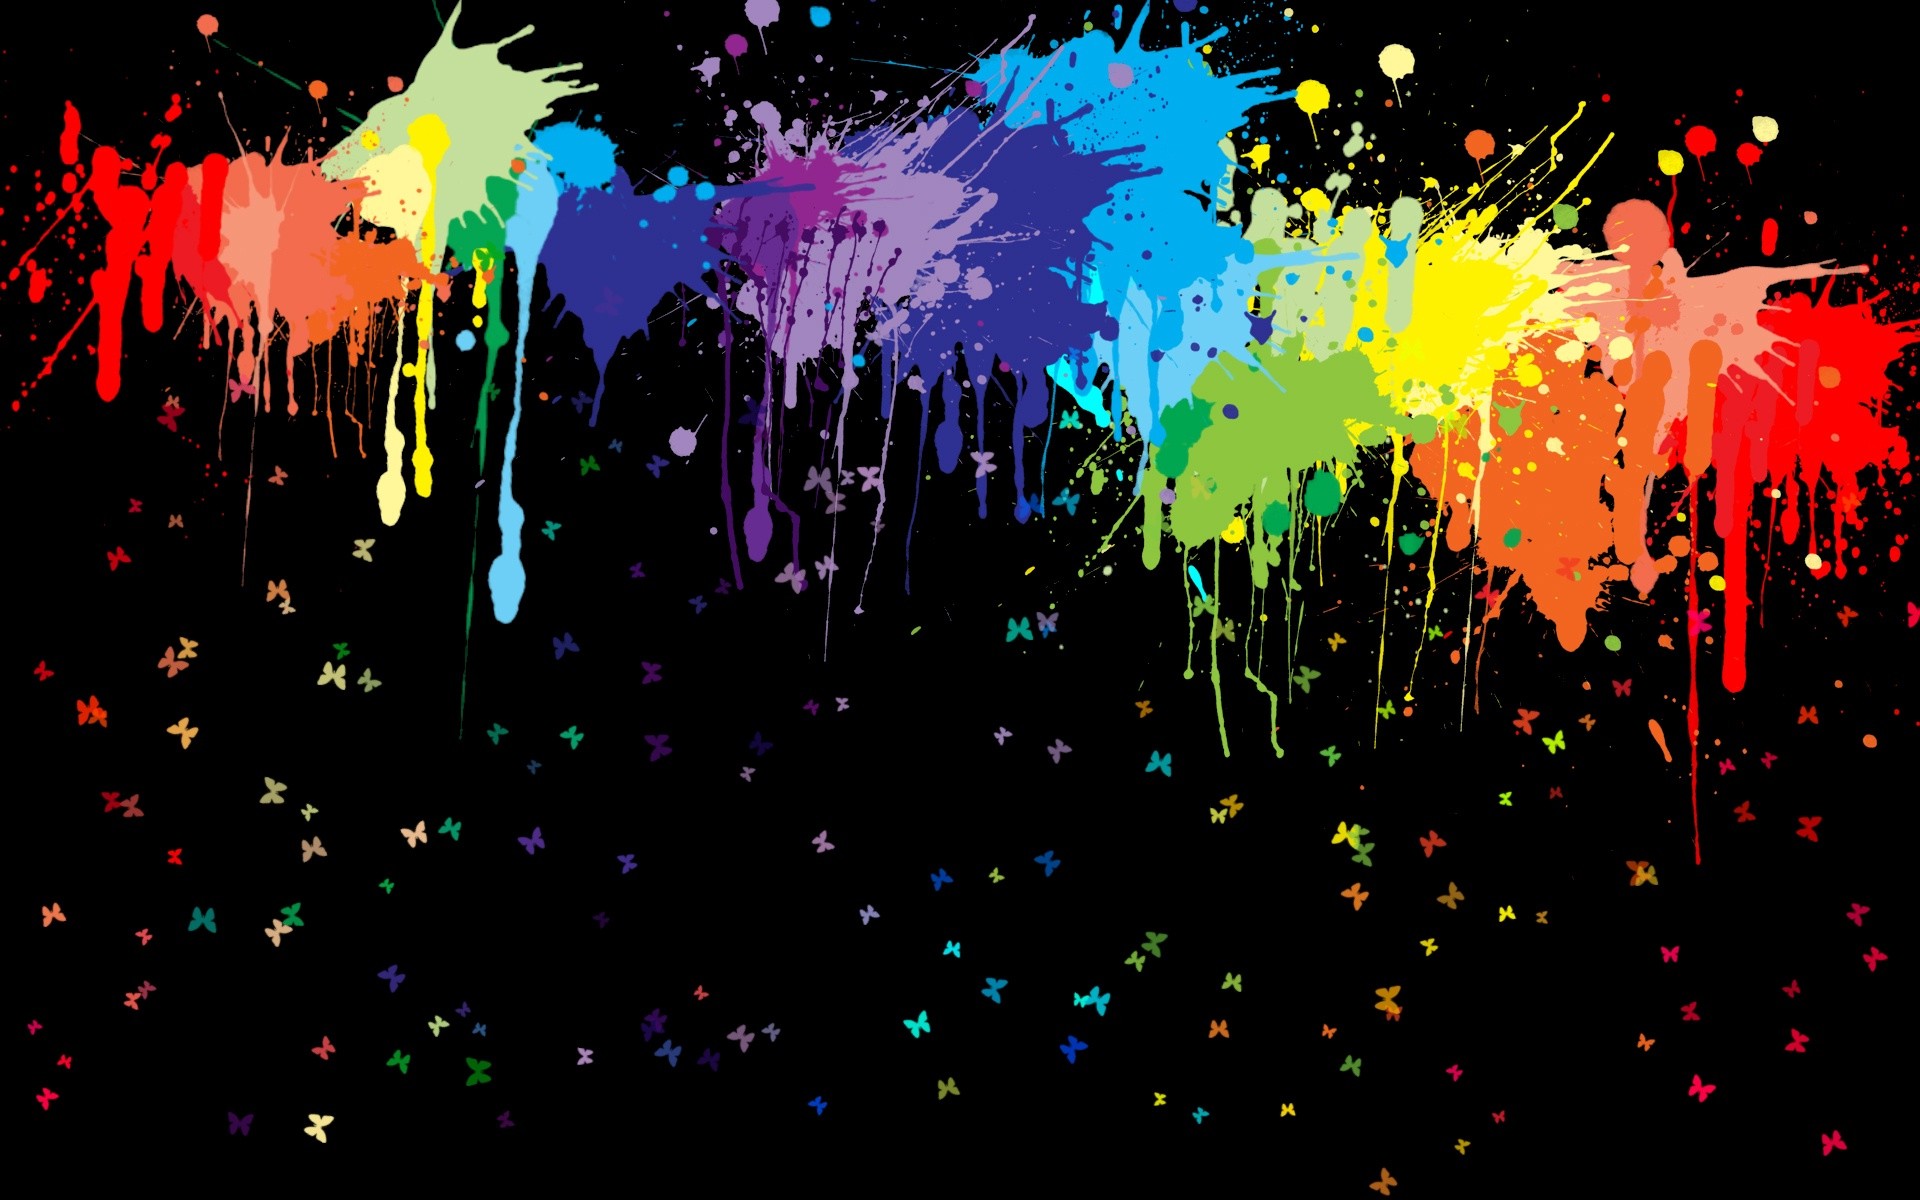 Find more items about Paint Splatter Wallpaper, Abstract Painting Wallpaper...